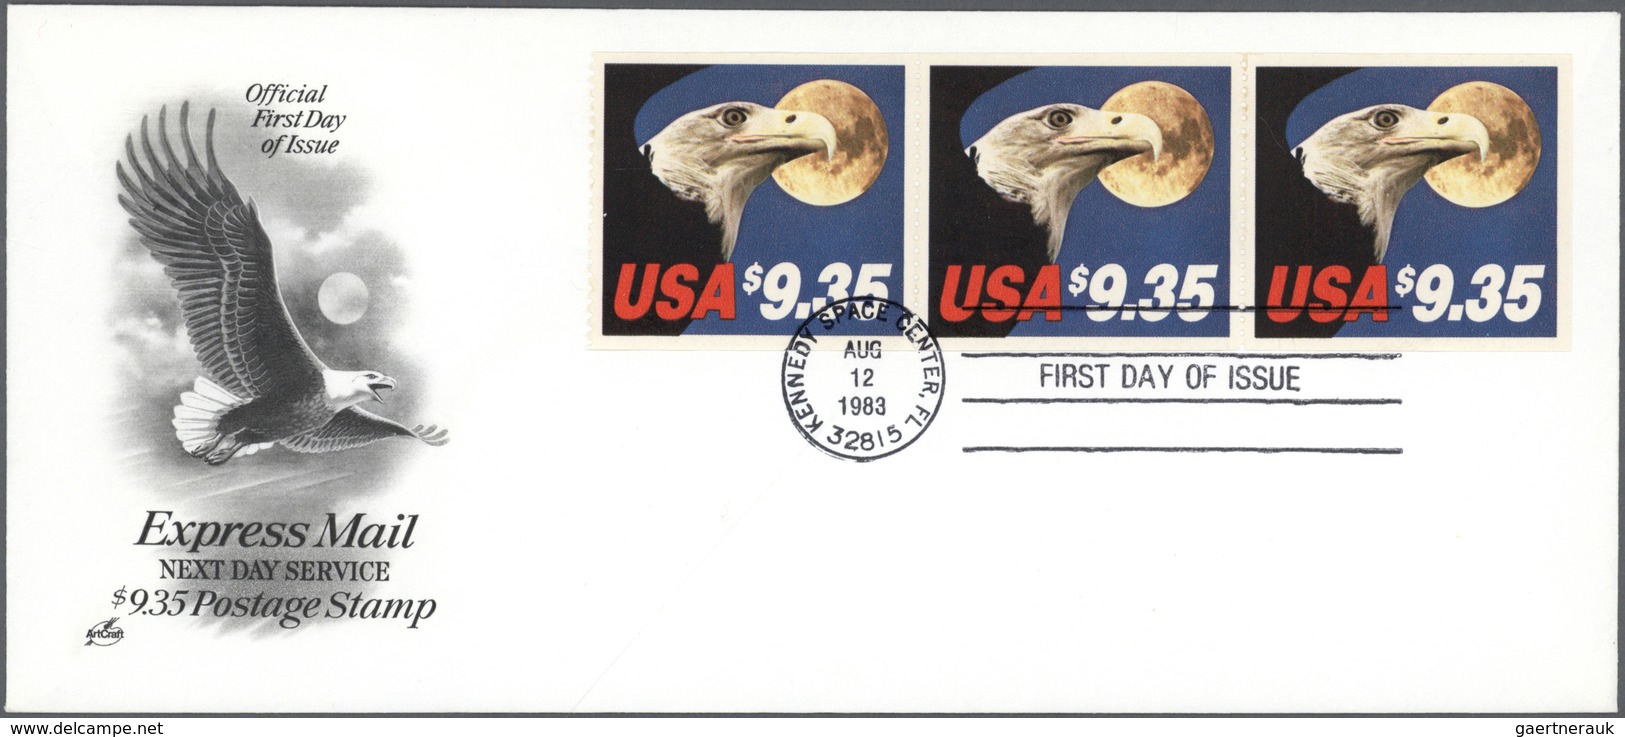 Thematik: Tiere-Greifvögel / Animals-birds Of Prey: 1983/1985, Eagle EXPRESS Mail Stamps $9.35 And $ - Arends & Roofvogels